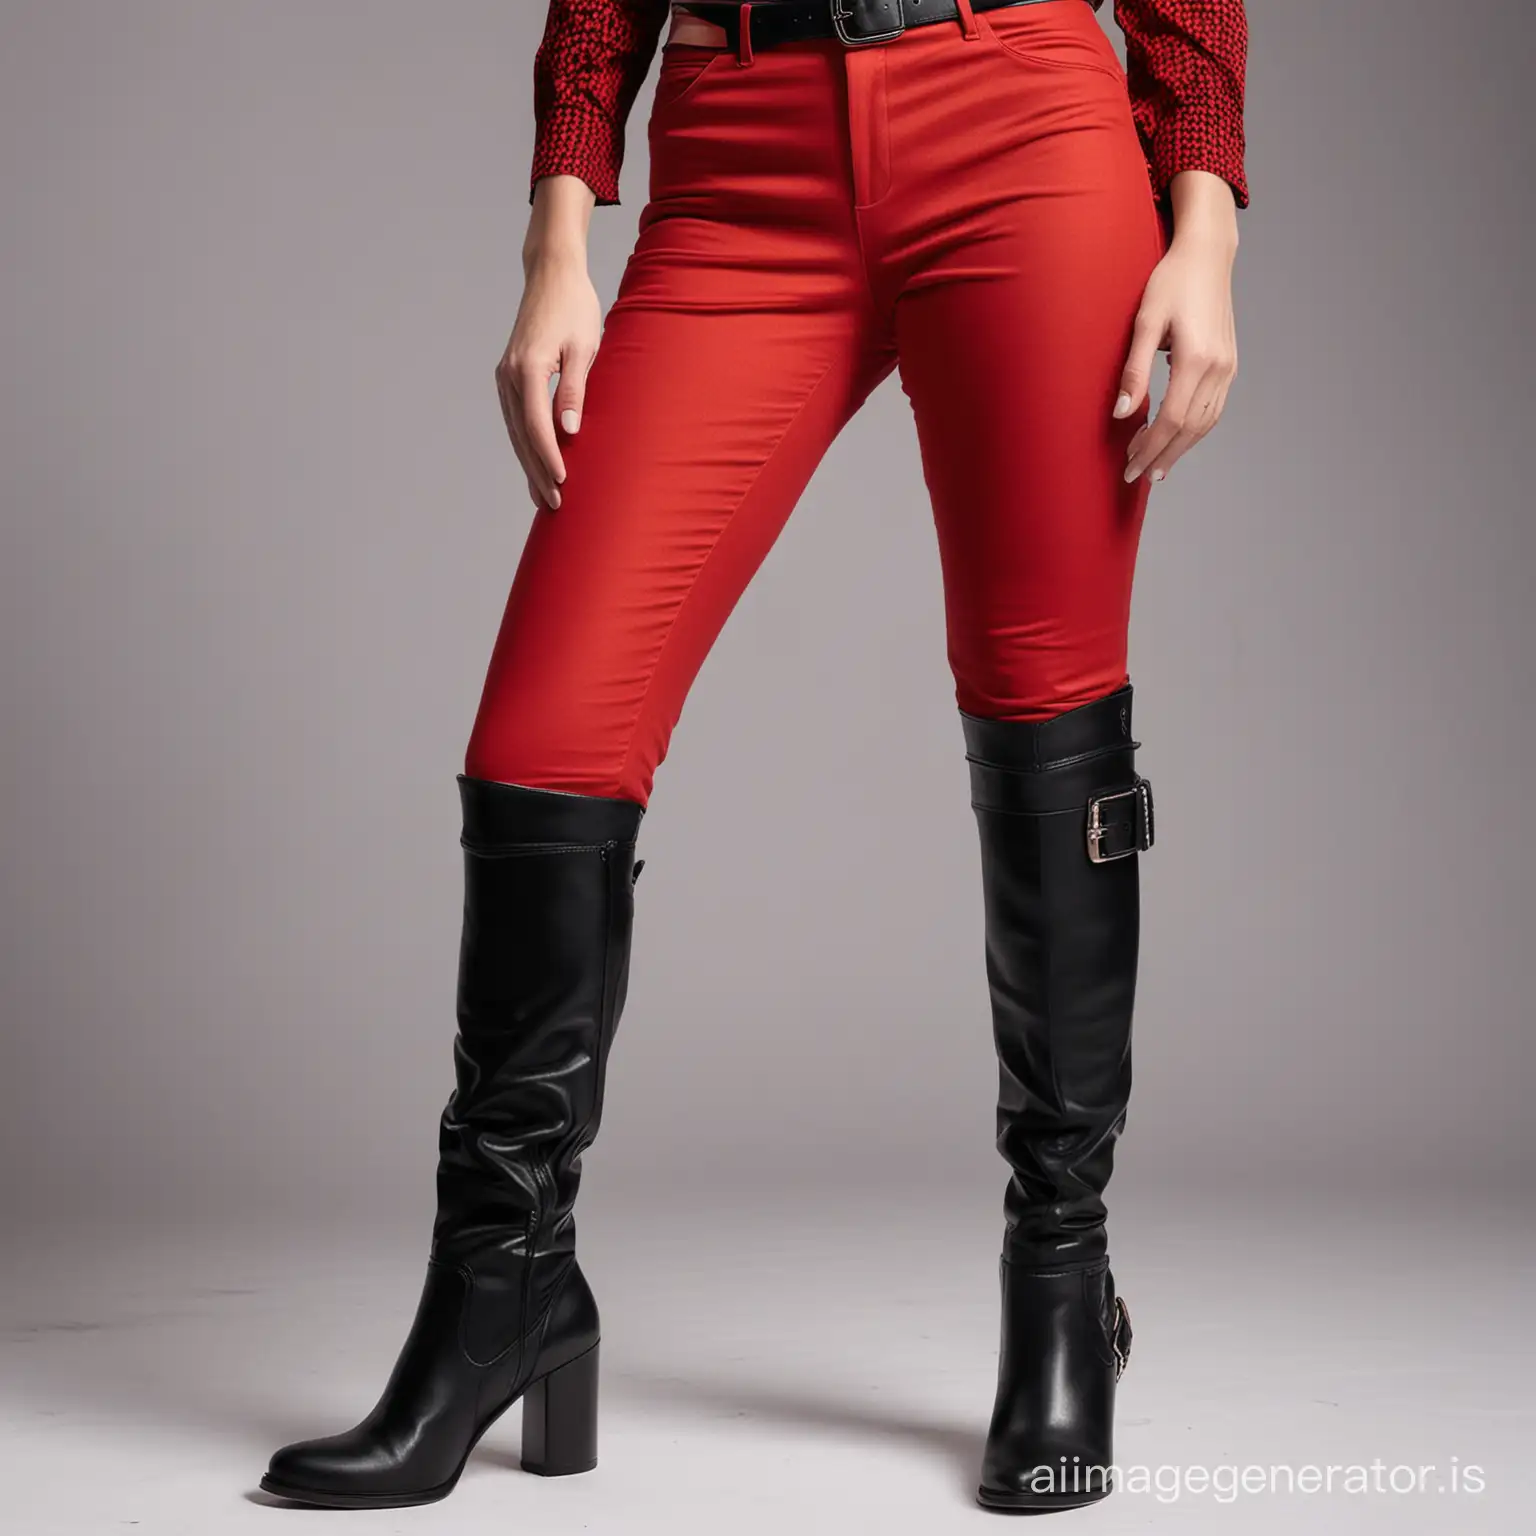 closeup on a lady in red textile pants with belt, tight black knee high boots, standing tall